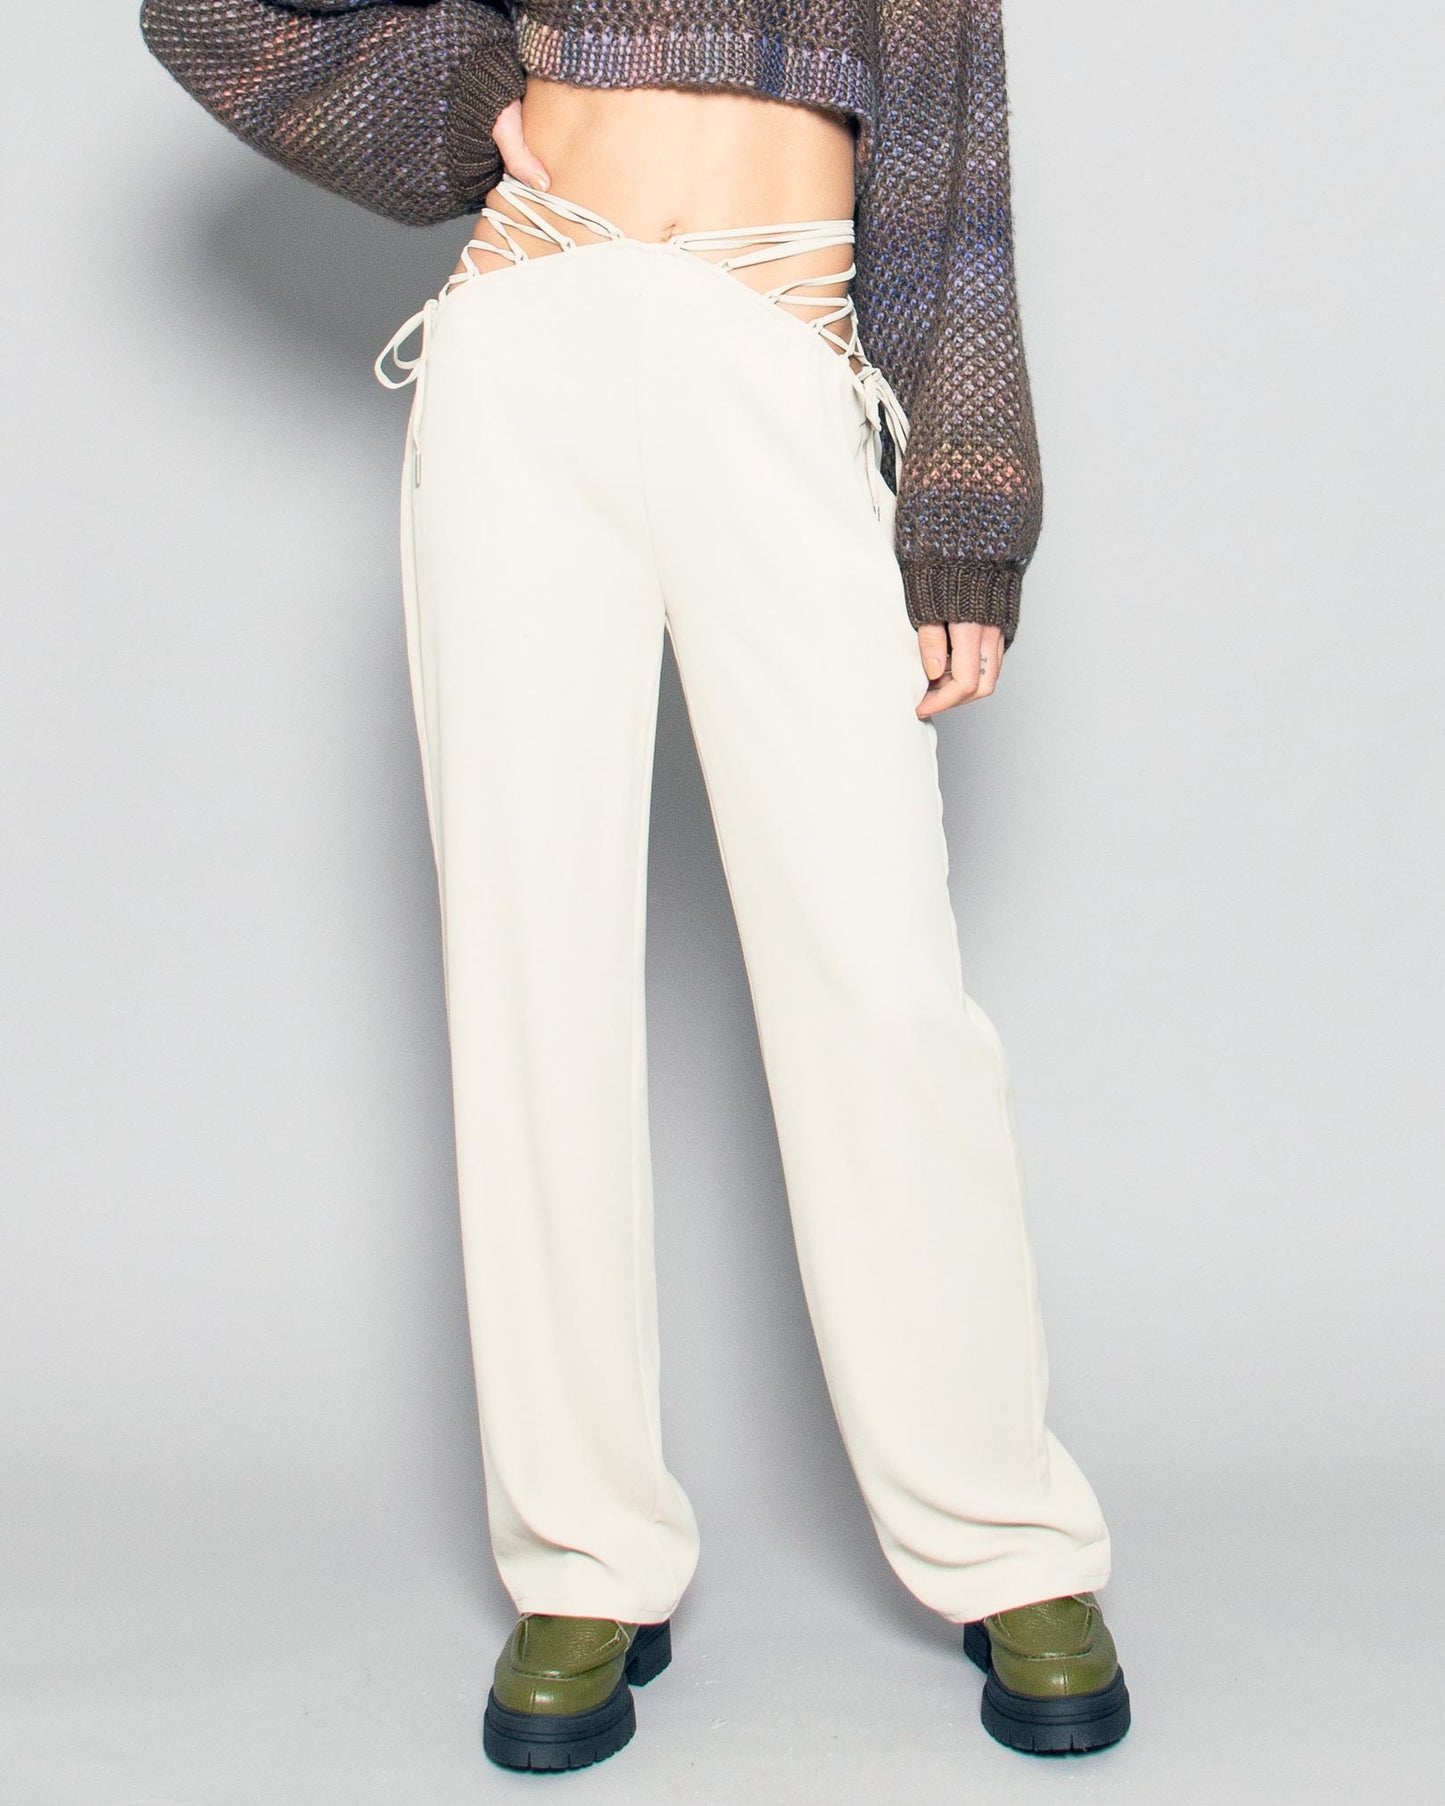 PERSONS Blake Lace Up Trousers in Sand available at Lahn.shop